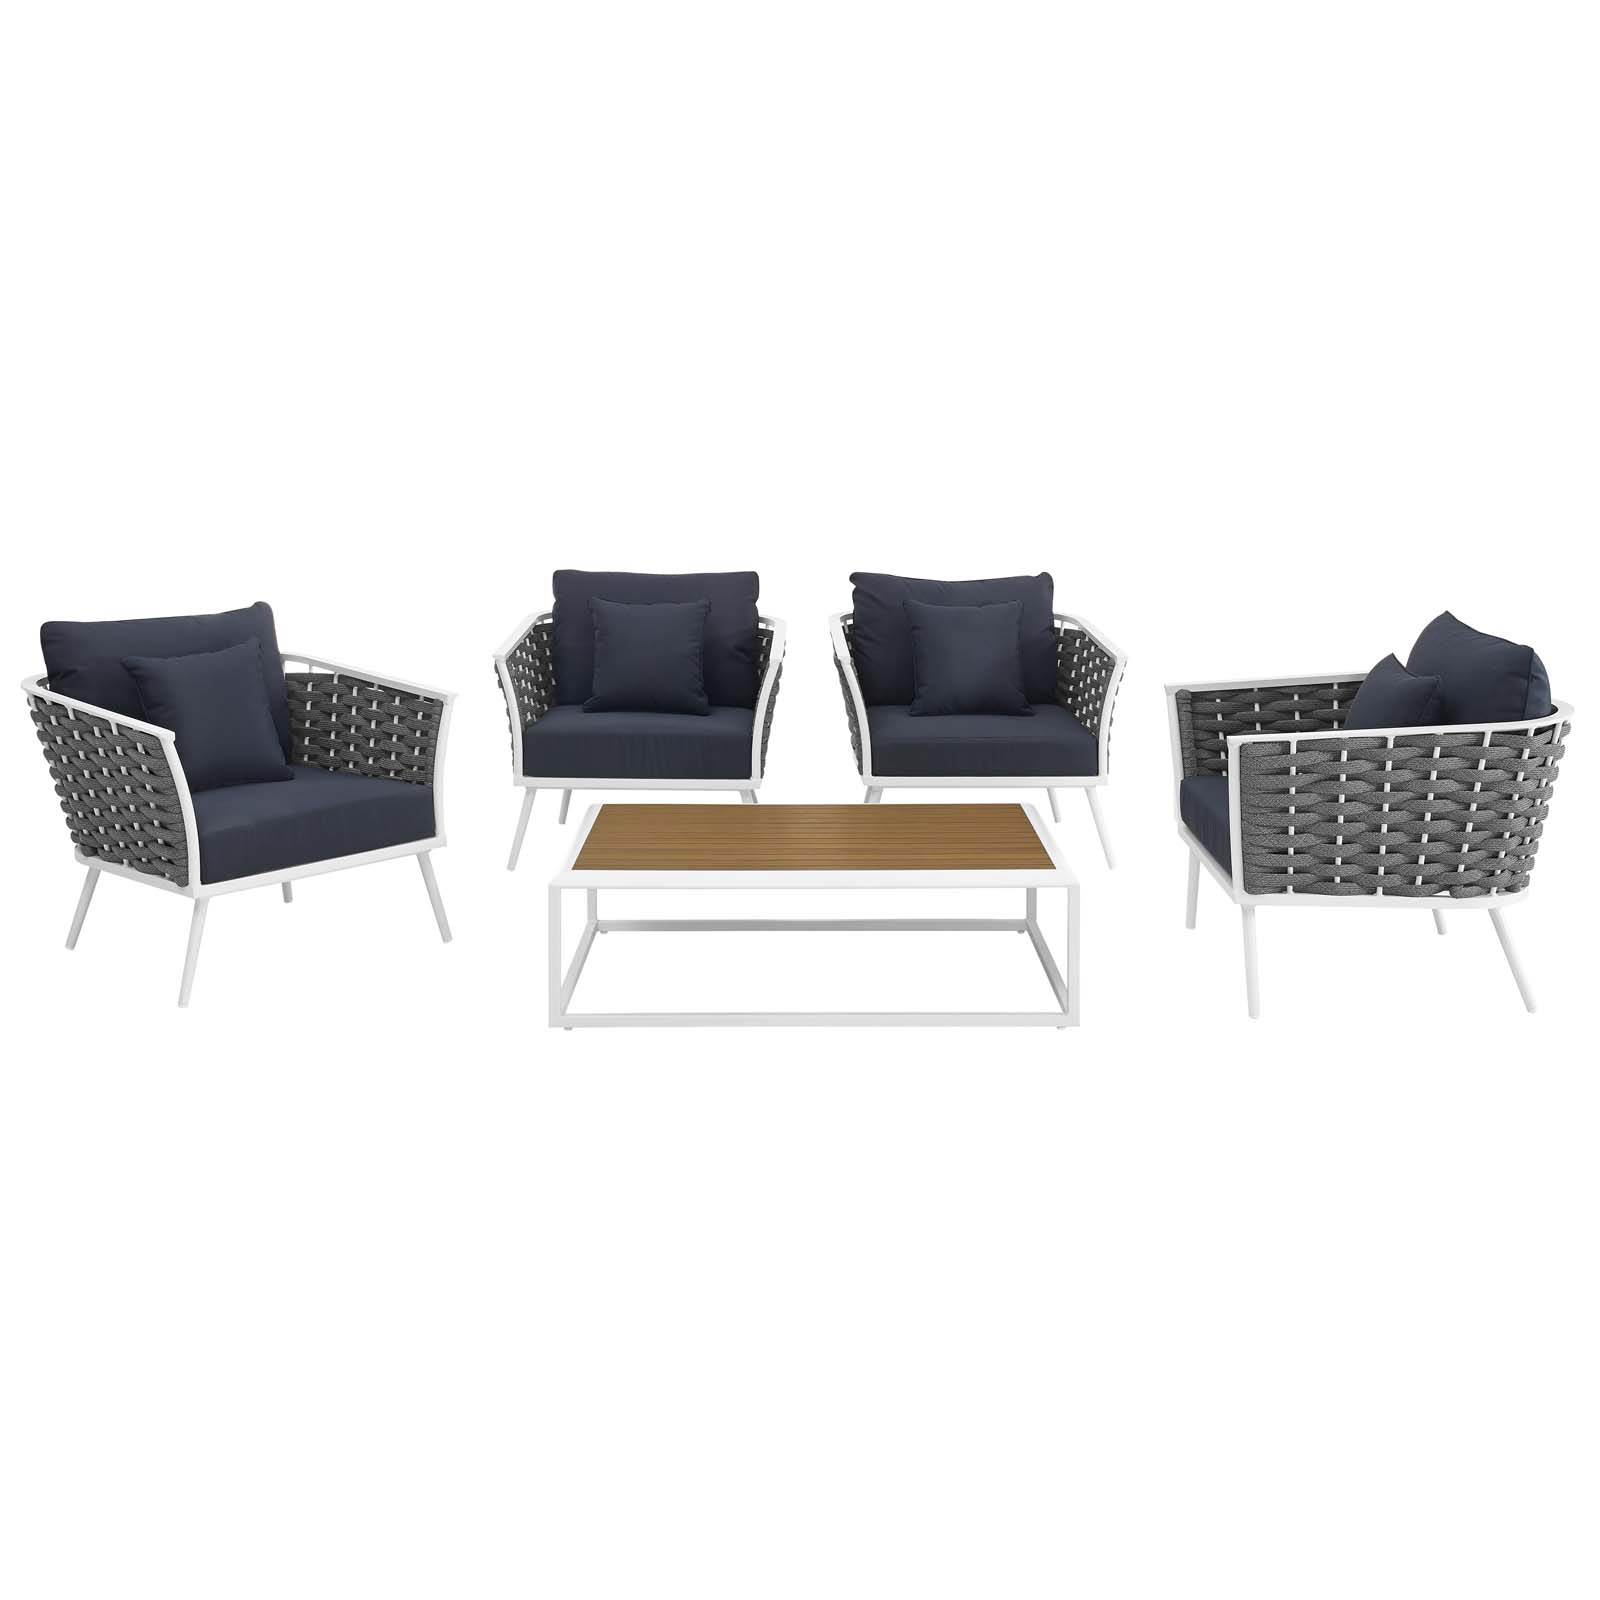 Modway Stance 5 Piece Outdoor Patio Aluminum Sectional Sofa Set in White Navy - image 4 of 8